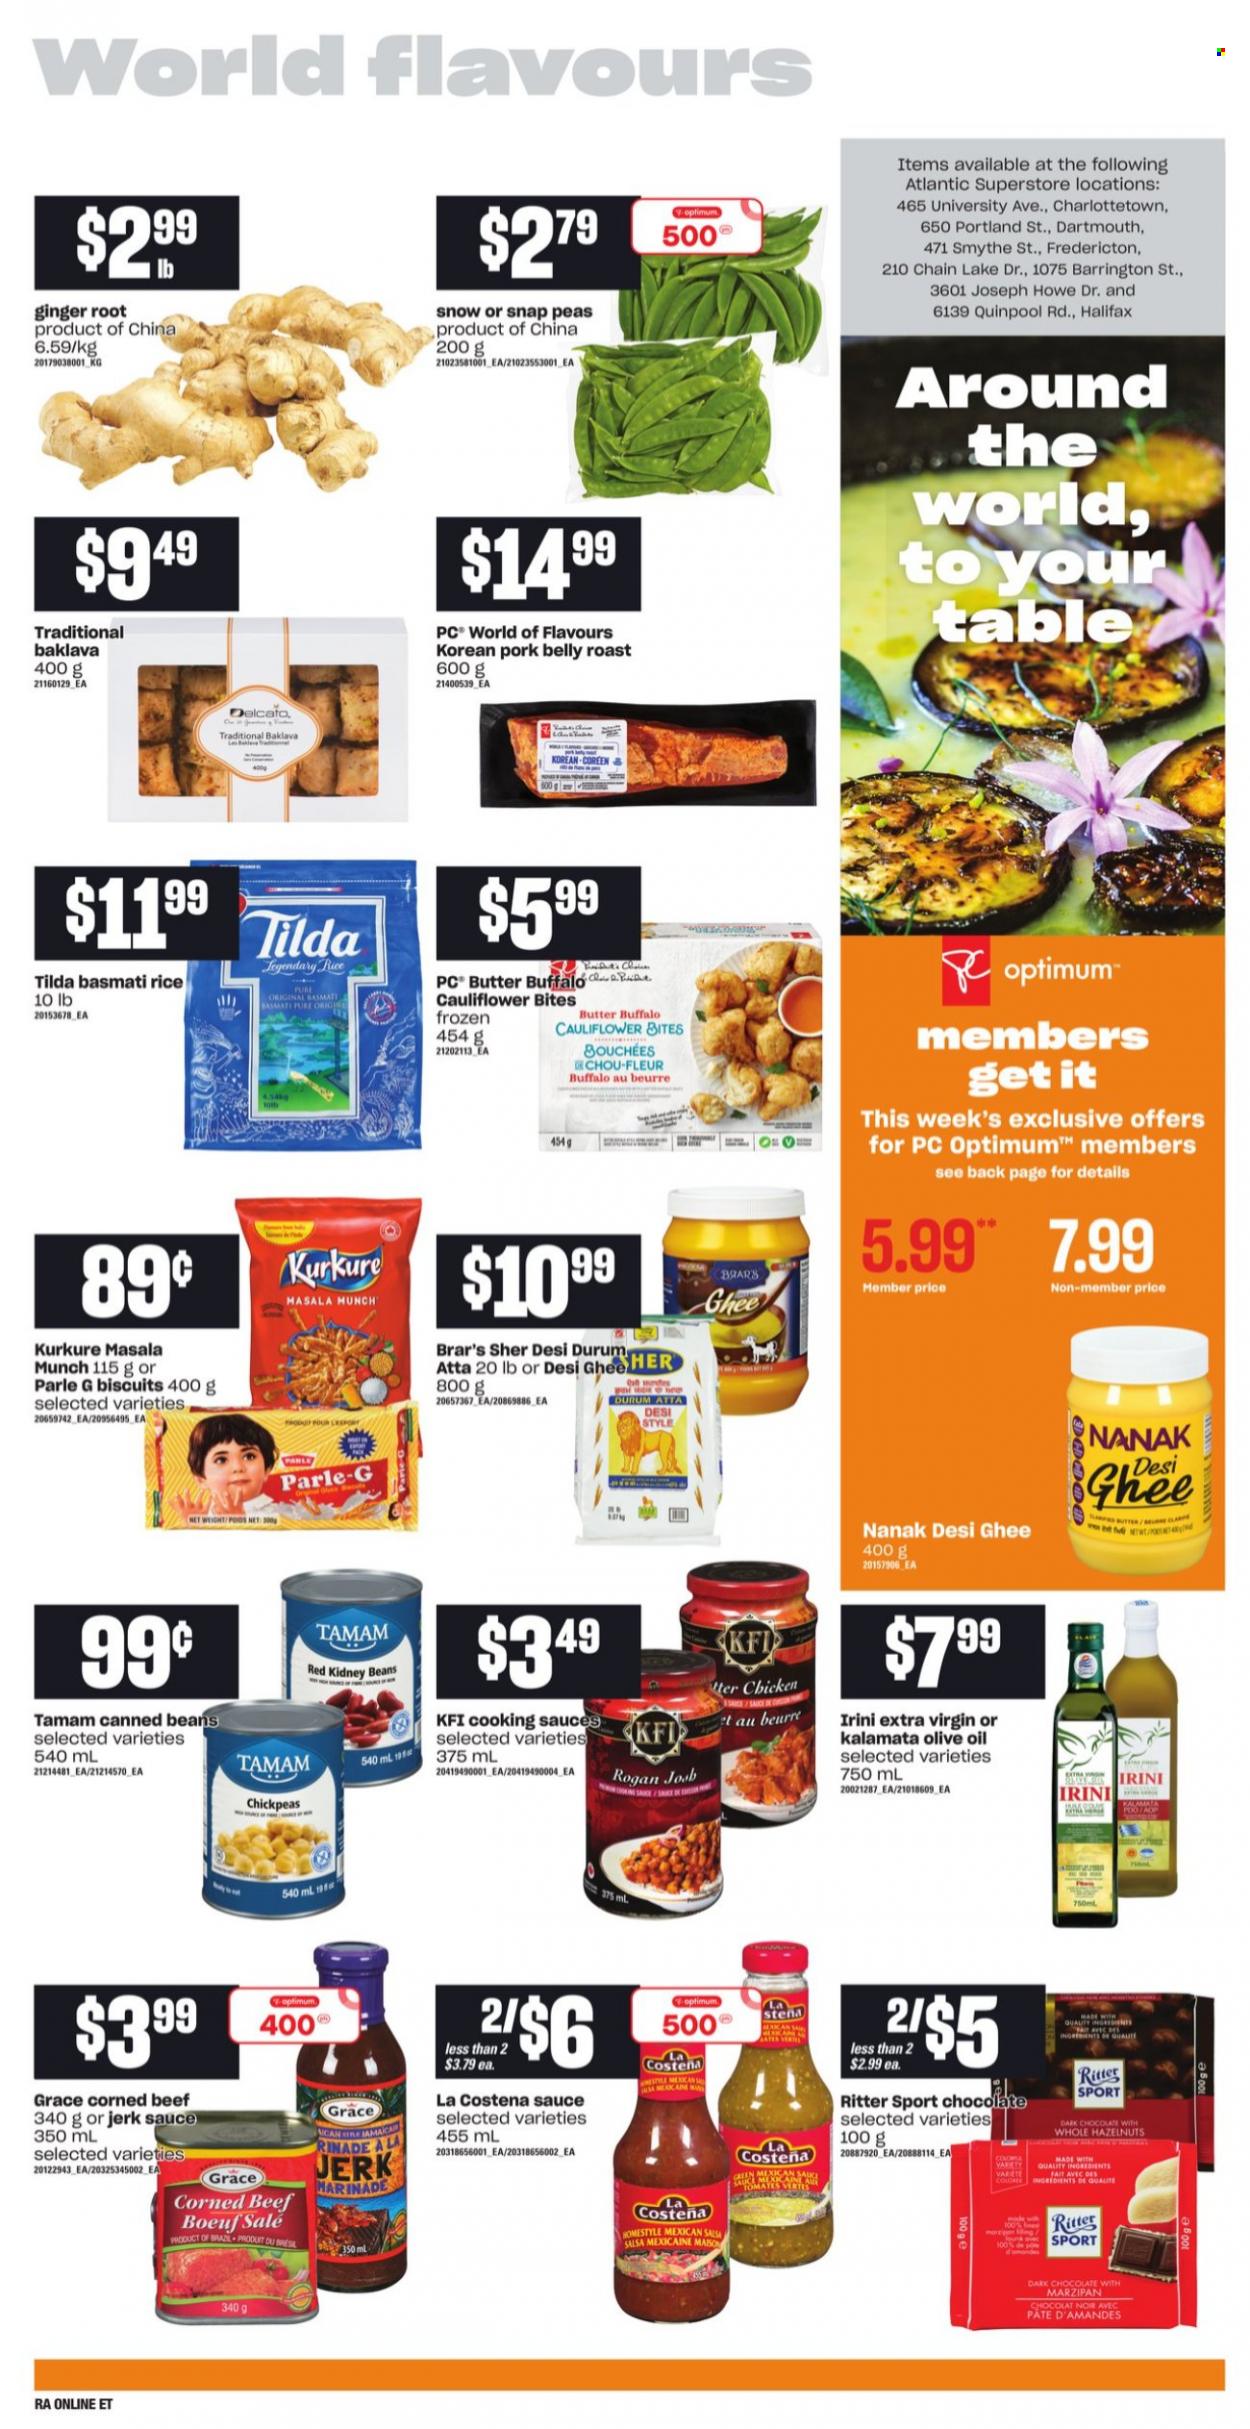 thumbnail - Atlantic Superstore Flyer - September 30, 2021 - October 06, 2021 - Sales products - beans, cauliflower, ginger, peas, corned beef, butter, ghee, snap peas, chocolate, biscuit, dark chocolate, Parle, Ritter Sport, flour, marzipan, kidney beans, basmati rice, rice, chickpeas, salsa, marinade, extra virgin olive oil, olive oil, oil, hazelnuts, beef meat, pork belly, pork meat, Optimum. Page 11.